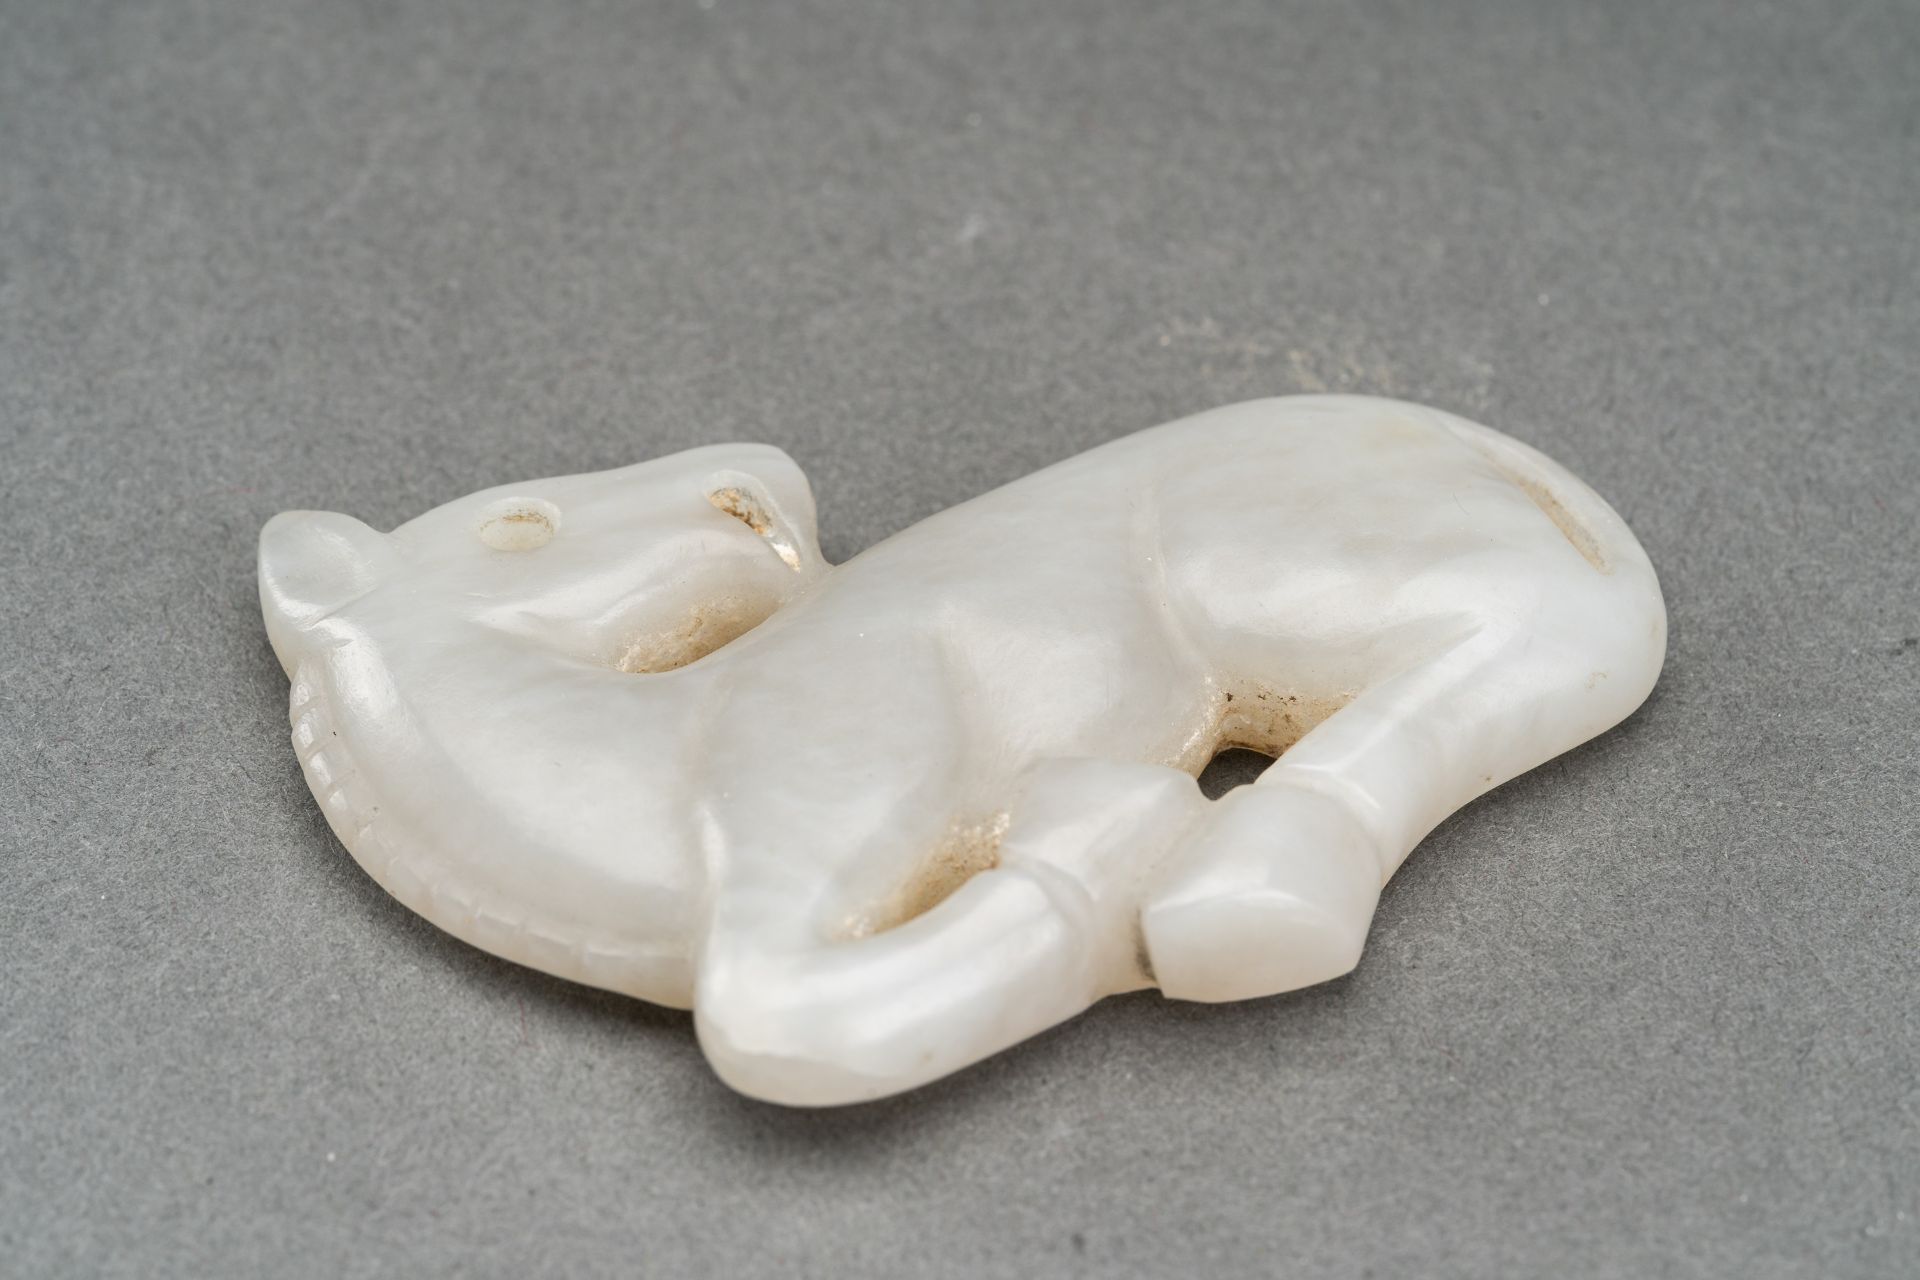 A GRAY JADE PENDANT OF A RECUMBENT HORSE, c. 1920s - Image 2 of 7